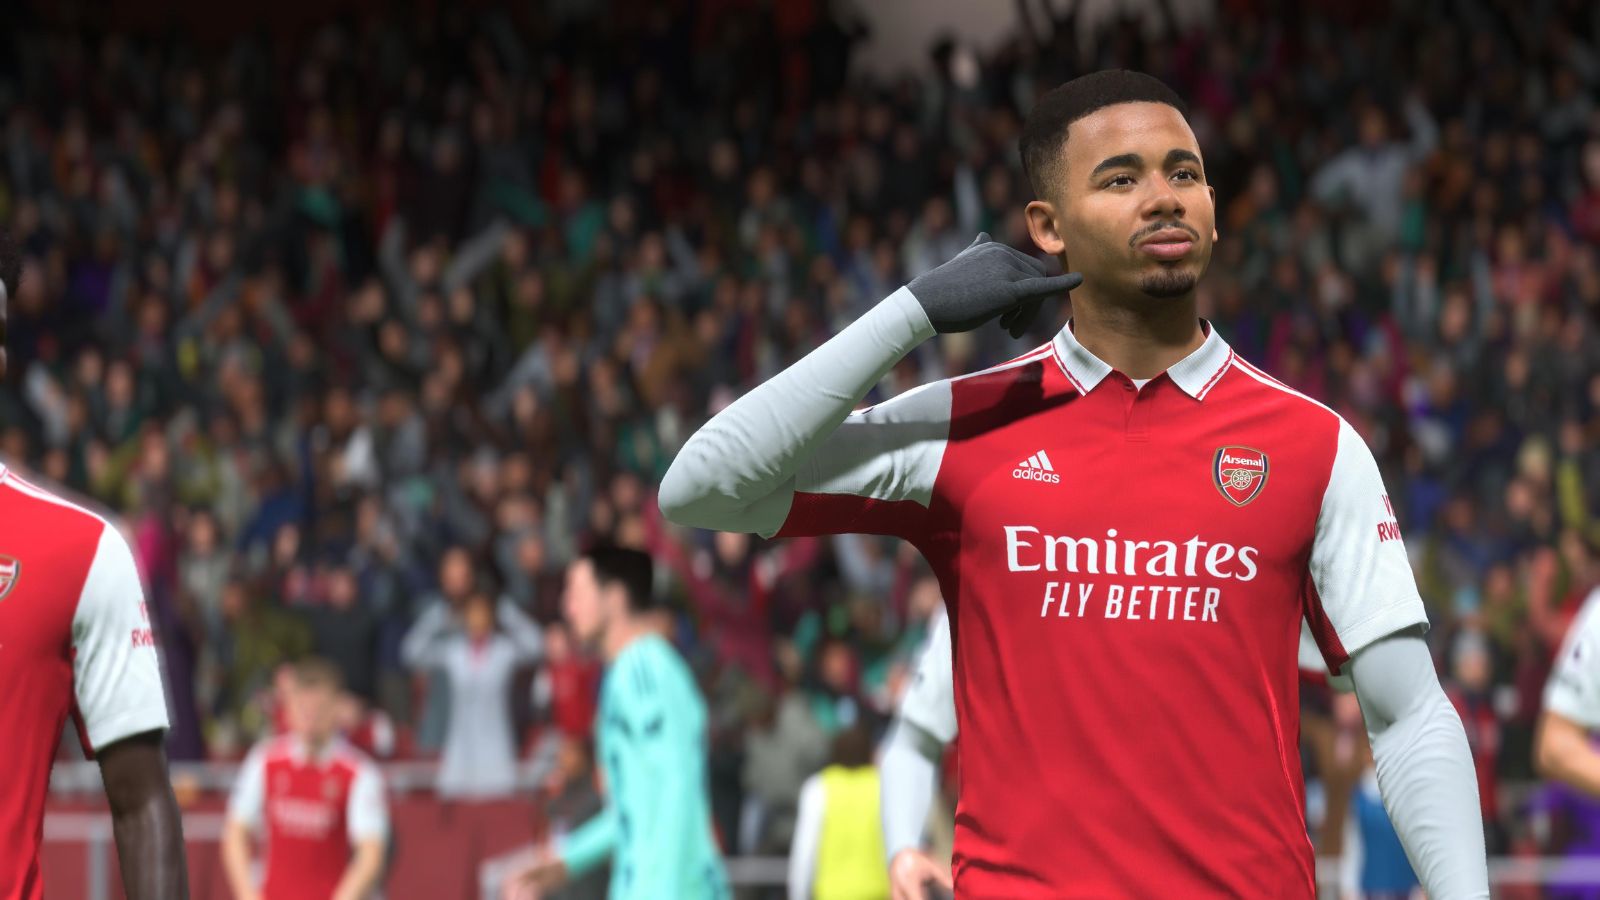 Will EA FC 24 have real players and teams? - Dexerto